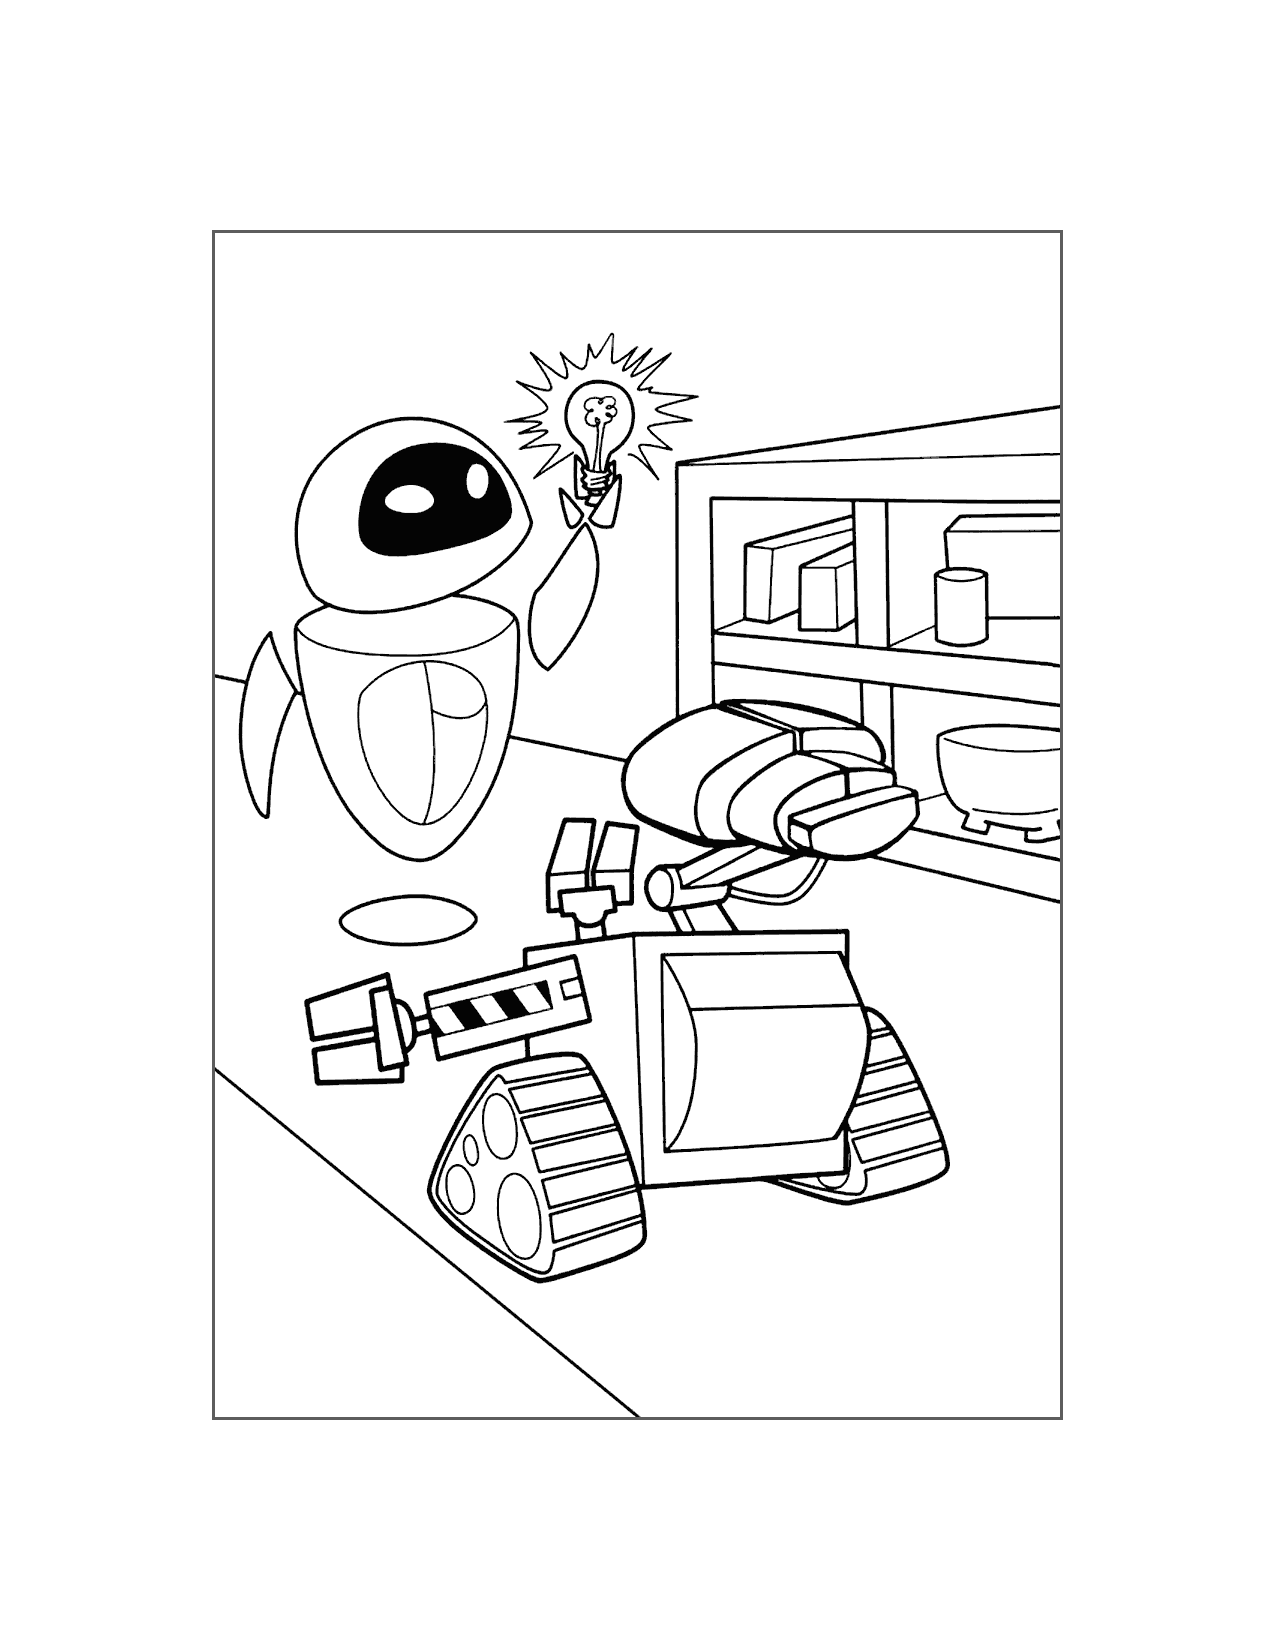 Eve Lights A Bulb Wall E Coloring Page